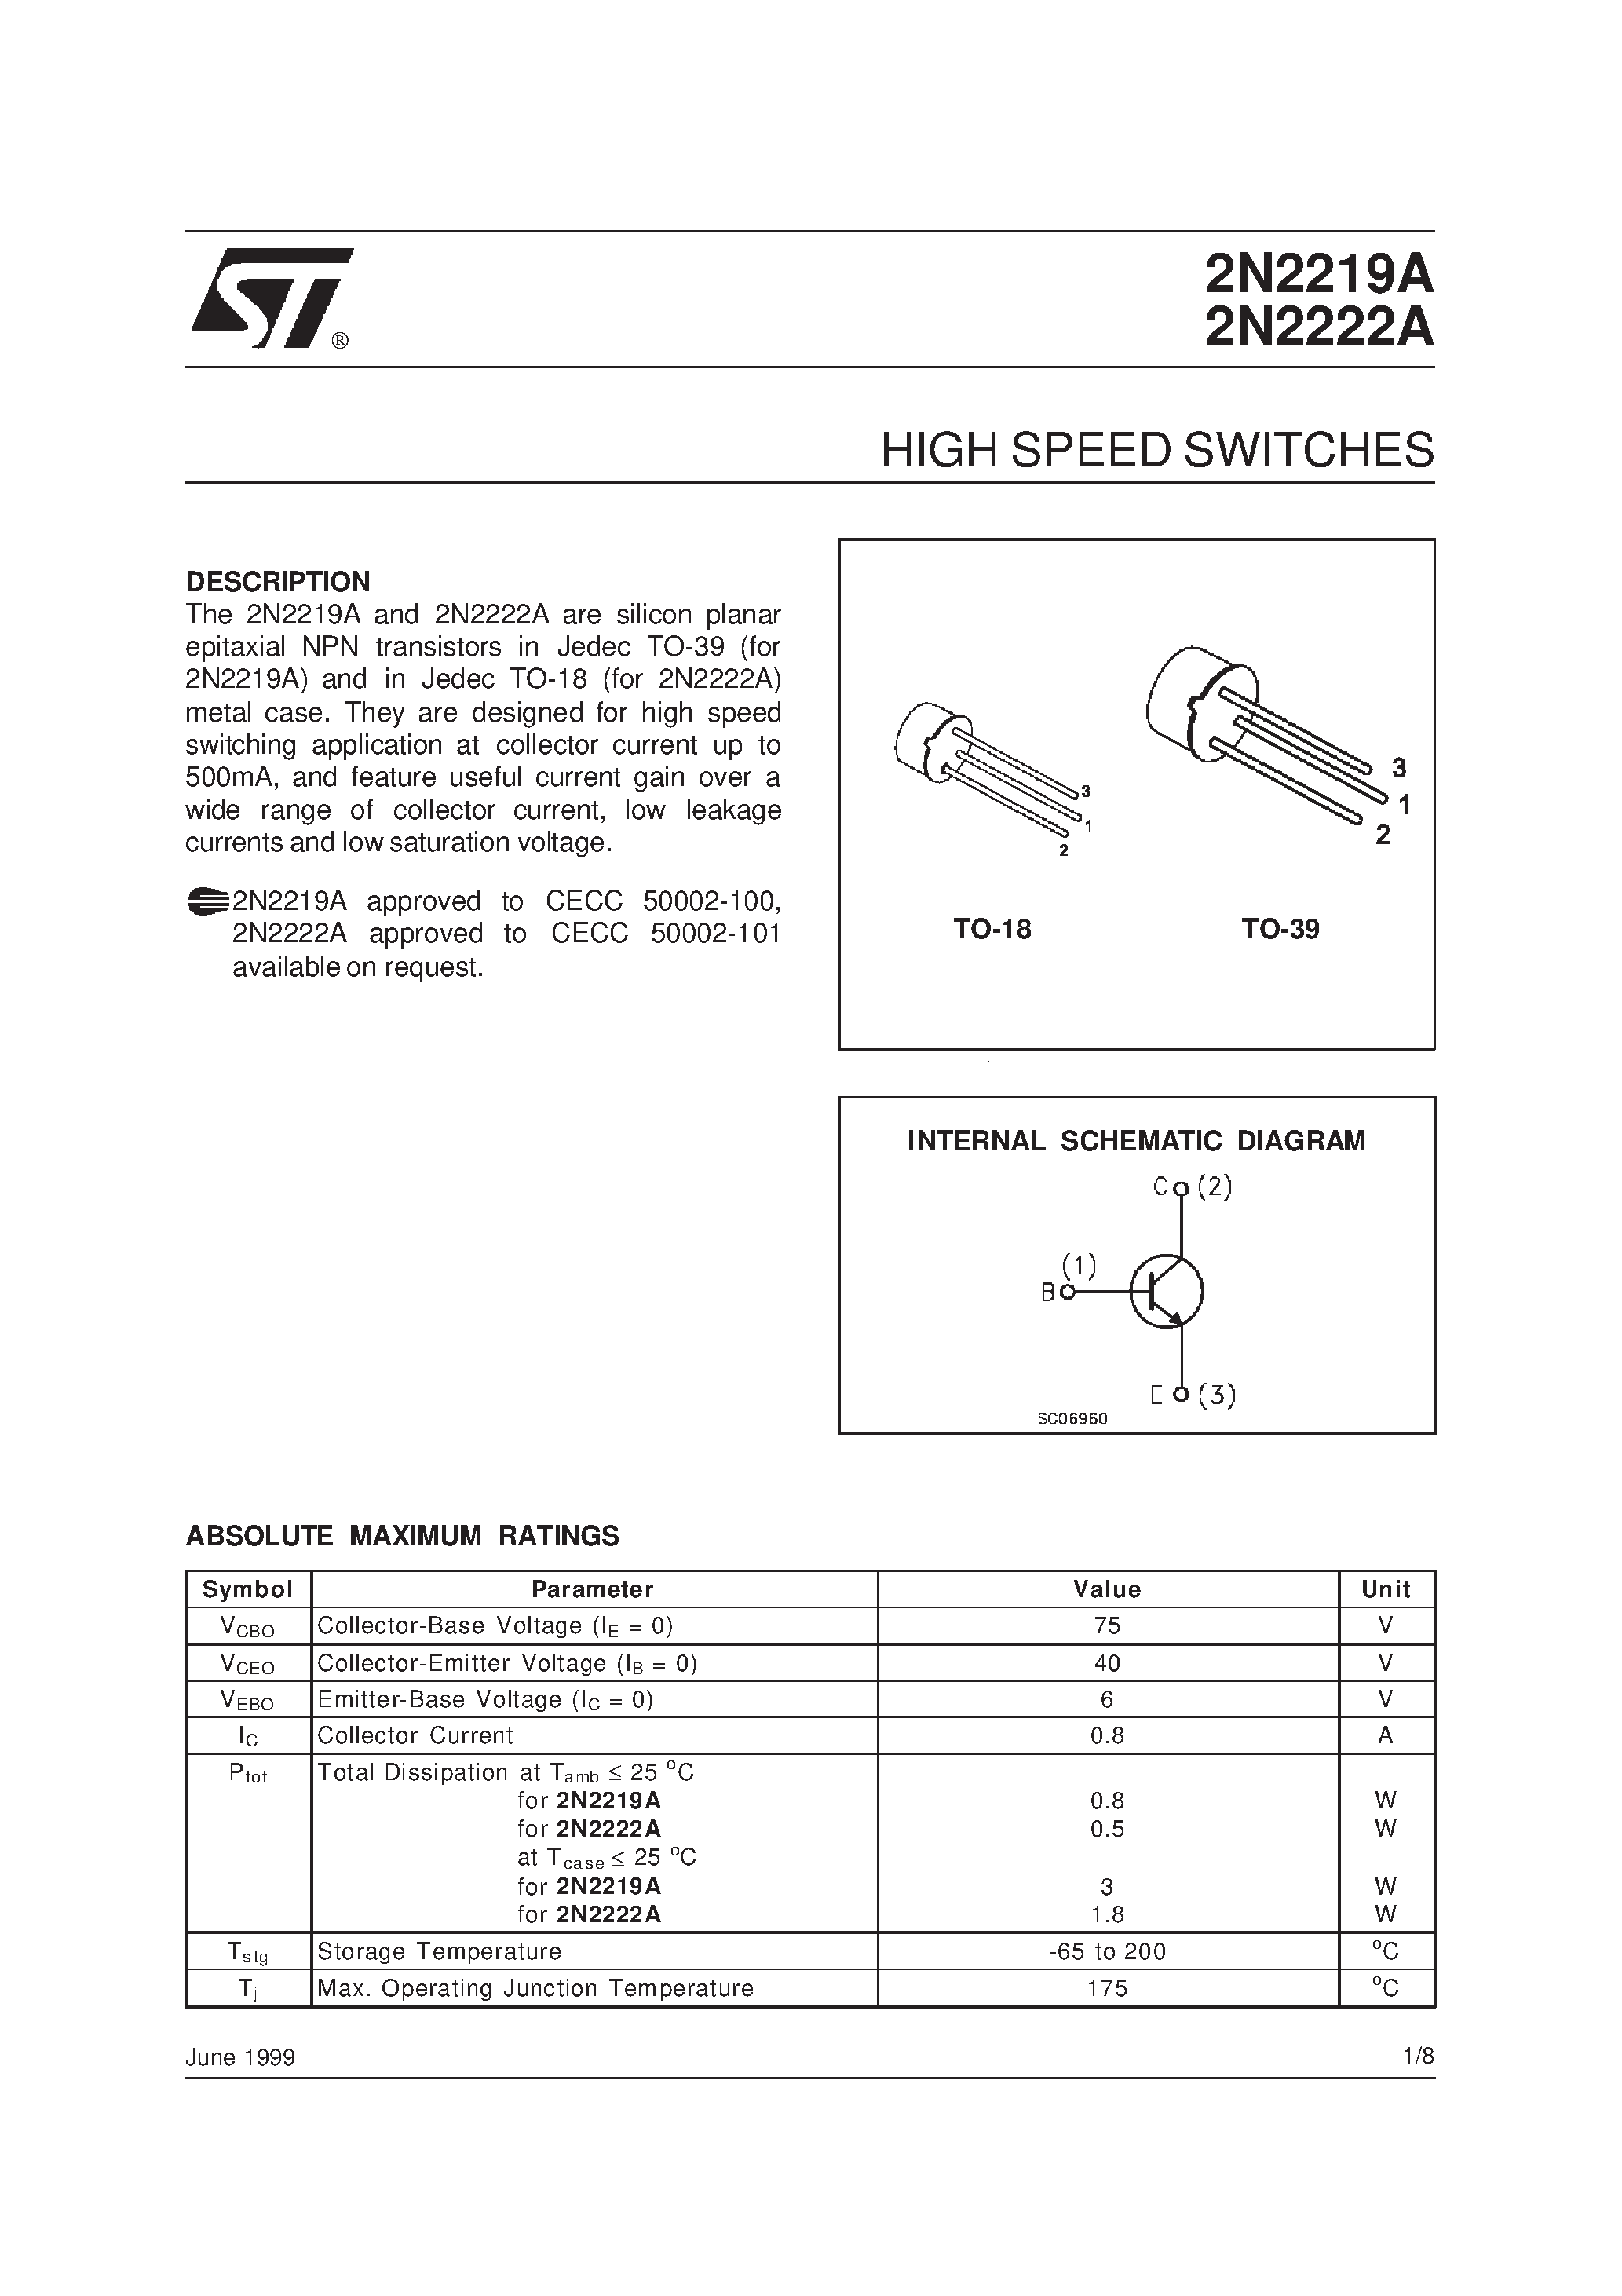 Datasheet 2N2222A - HIGH SPEED SWITCHES page 1